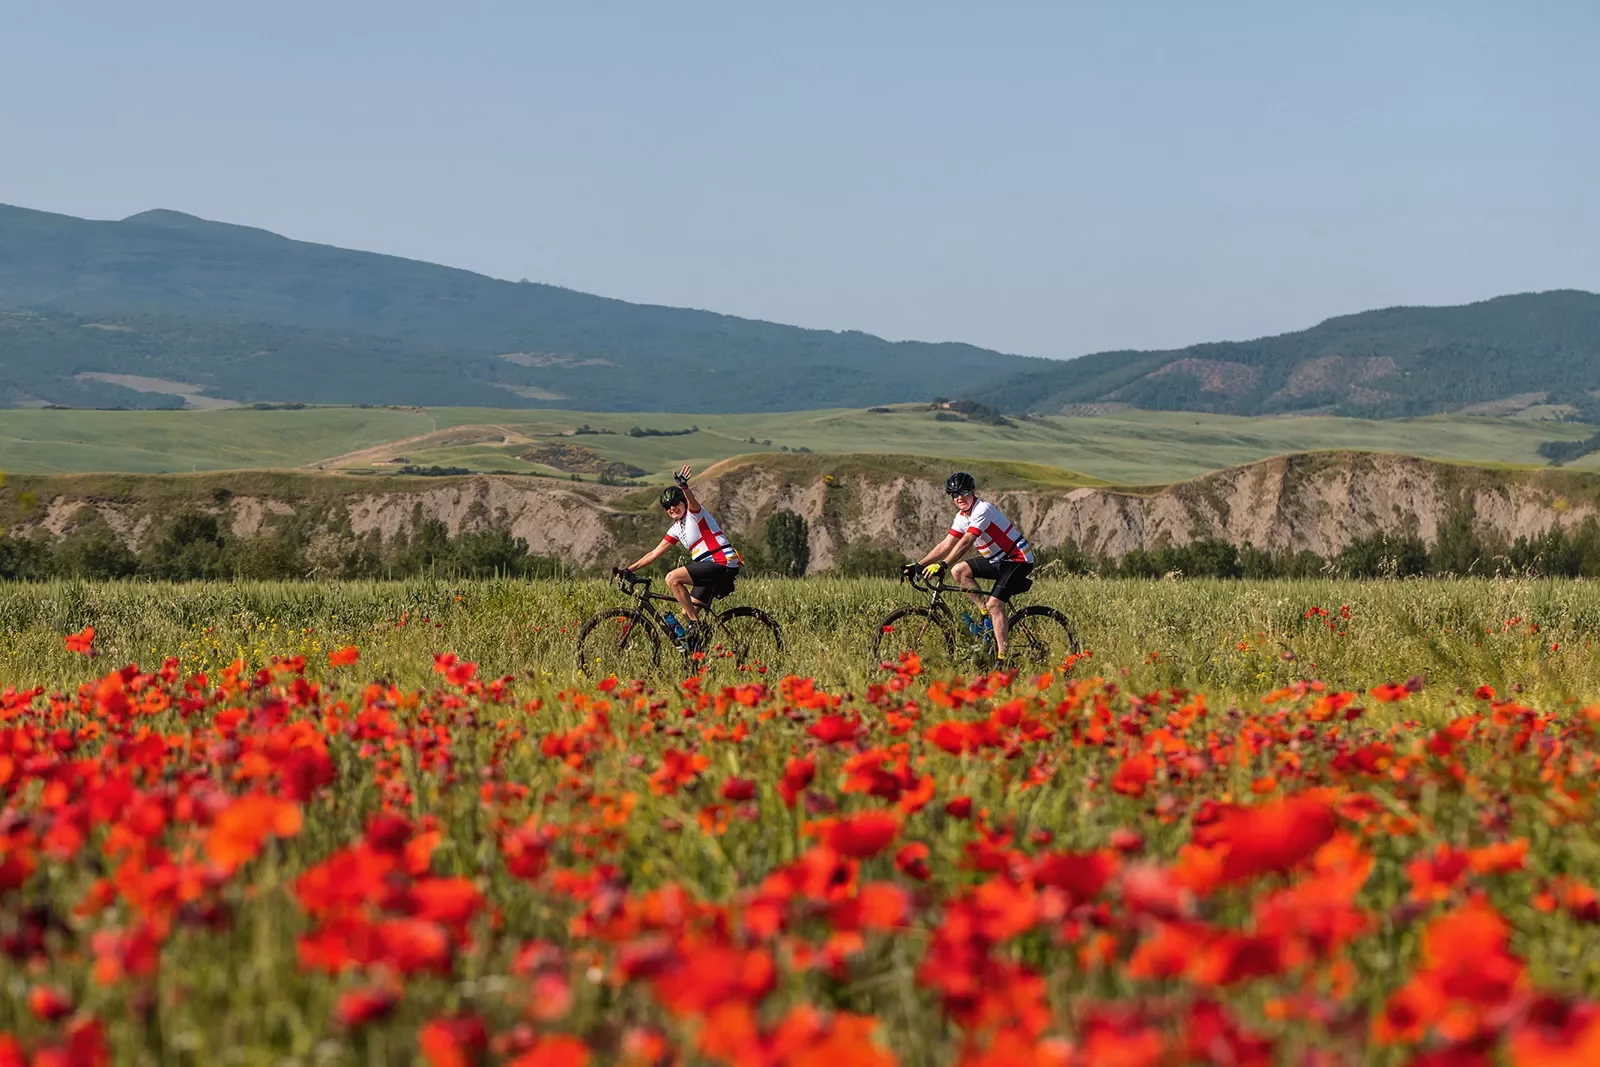 Guests cycling in front of red flower bushes, hills in distance.